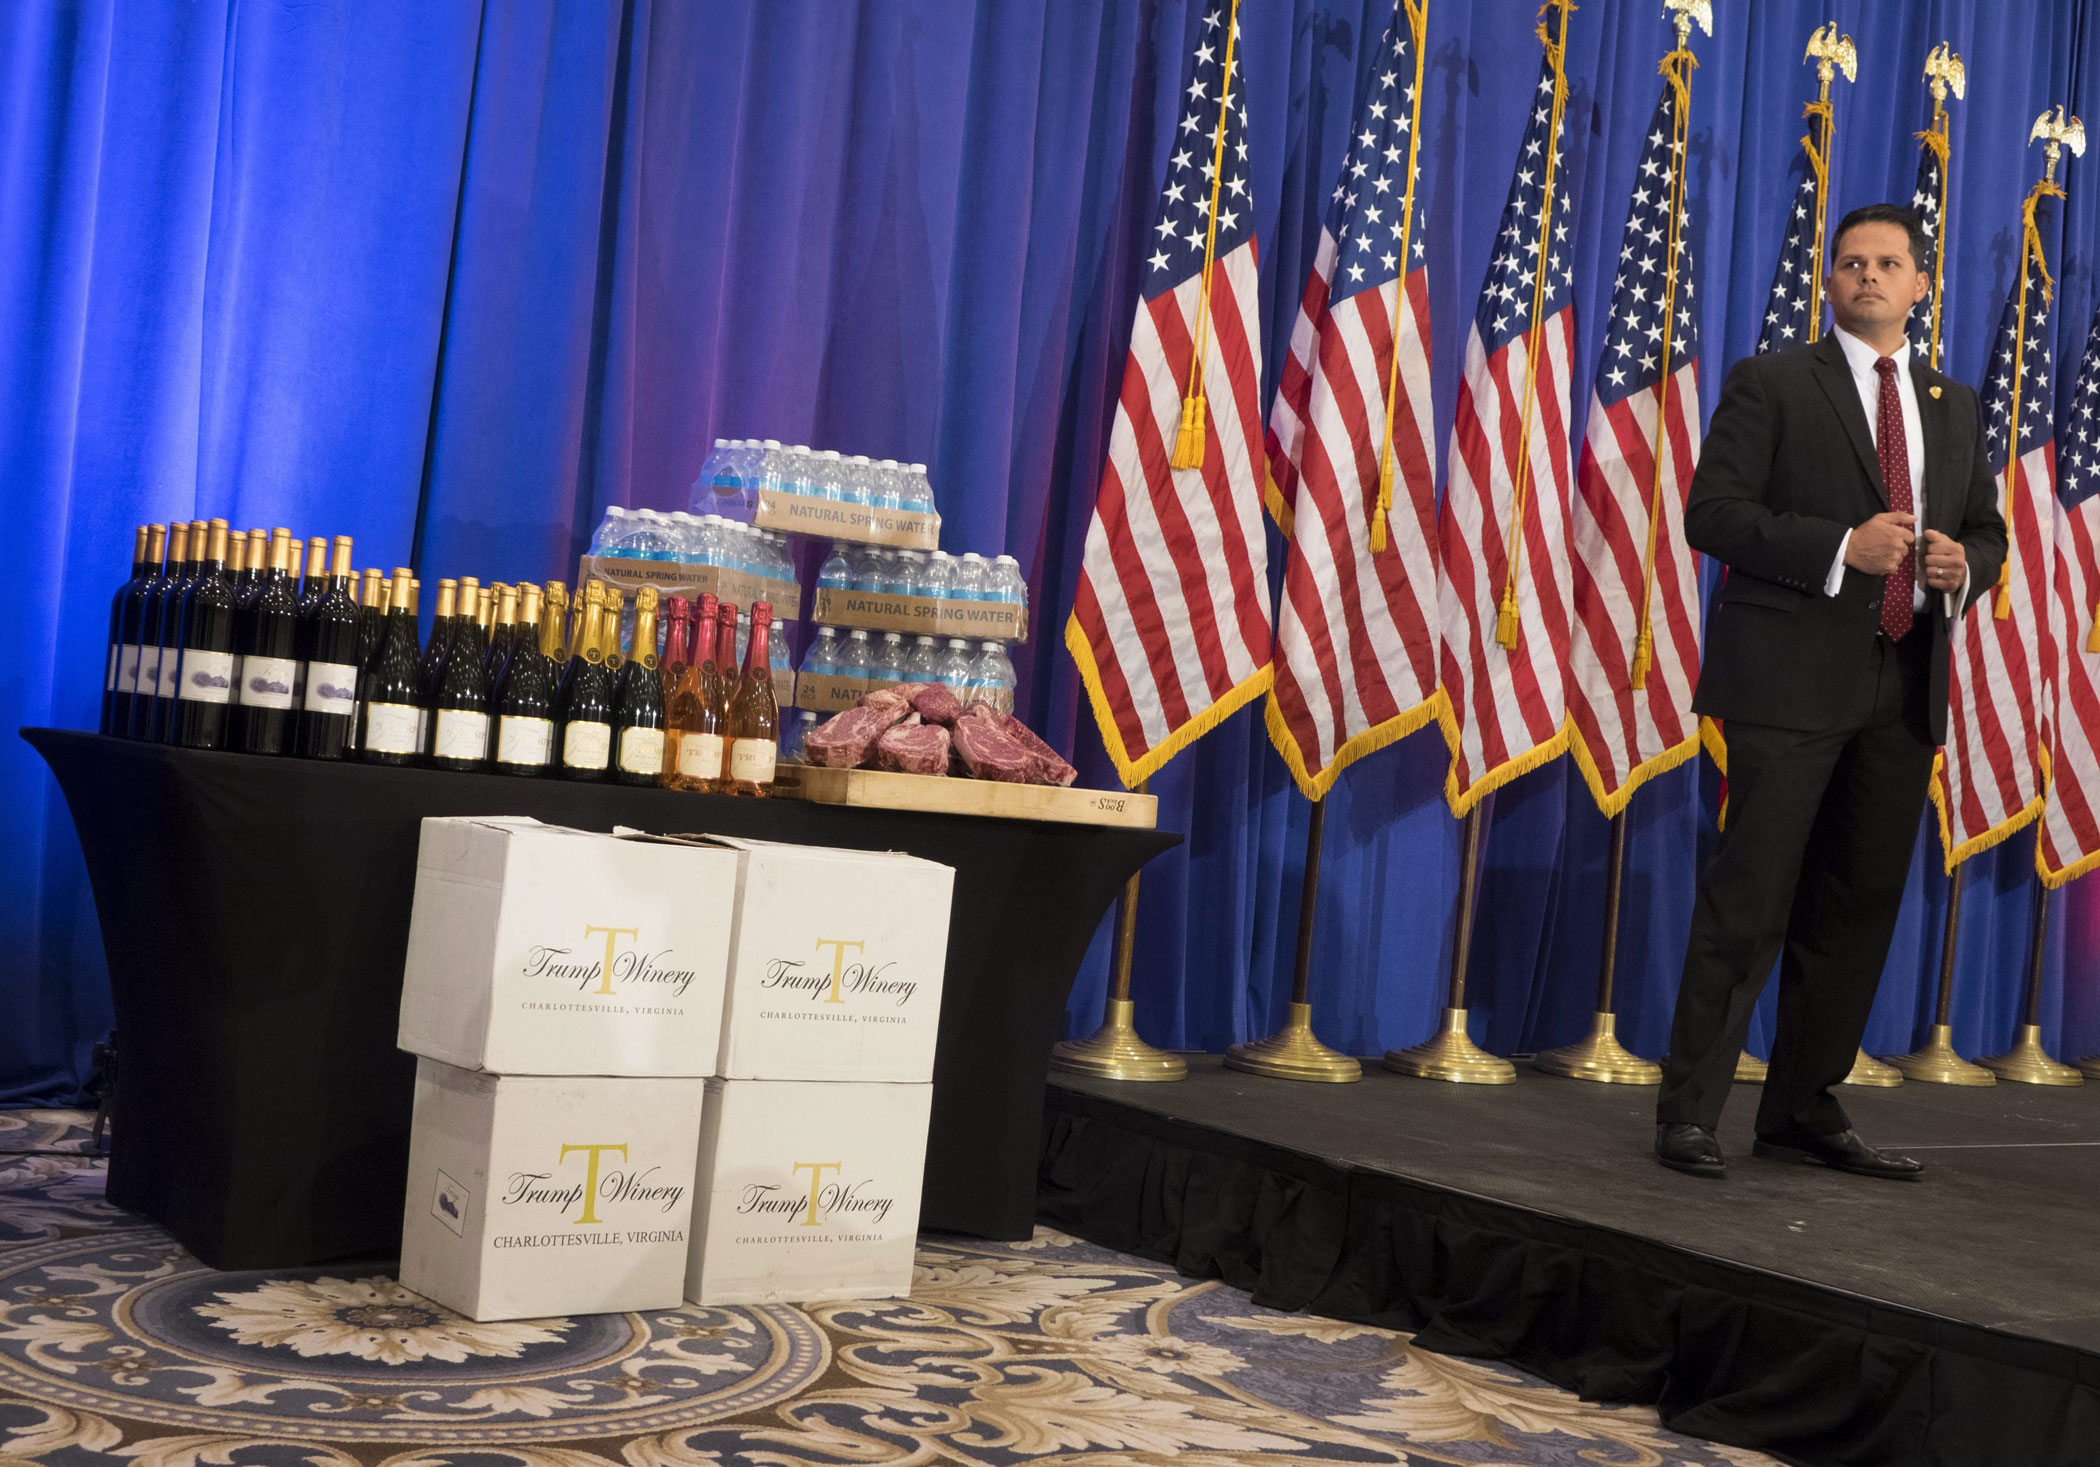 A security guard stands next to a display of meat, wine and water beside the podium Republican presidential candidate Donald Trump before a news conference at the Trump National Golf Club Jupiter on March 8 in Jupiter, Fla.